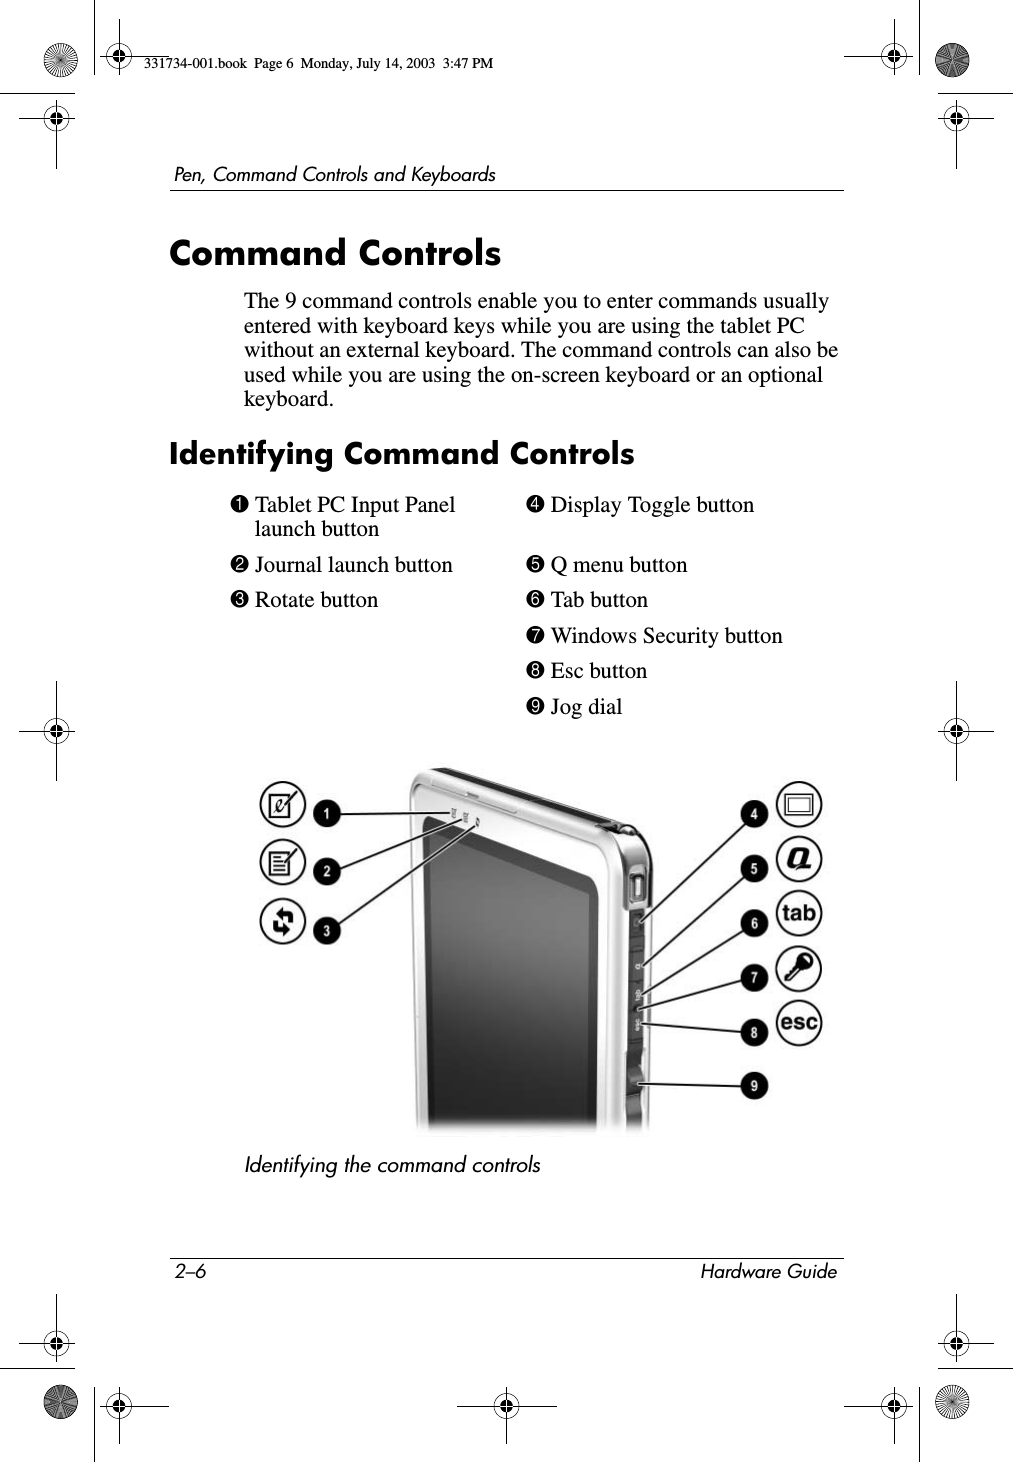 2–6 Hardware GuidePen, Command Controls and KeyboardsCommand ControlsThe 9 command controls enable you to enter commands usually entered with keyboard keys while you are using the tablet PC without an external keyboard. The command controls can also be used while you are using the on-screen keyboard or an optional keyboard.Identifying Command ControlsIdentifying the command controls1 Tablet PC Input Panel launch button4 Display Toggle button2 Journal launch button 5 Q menu button3 Rotate button 6 Tab button7 Windows Security button8 Esc button9 Jog dial331734-001.book  Page 6  Monday, July 14, 2003  3:47 PM